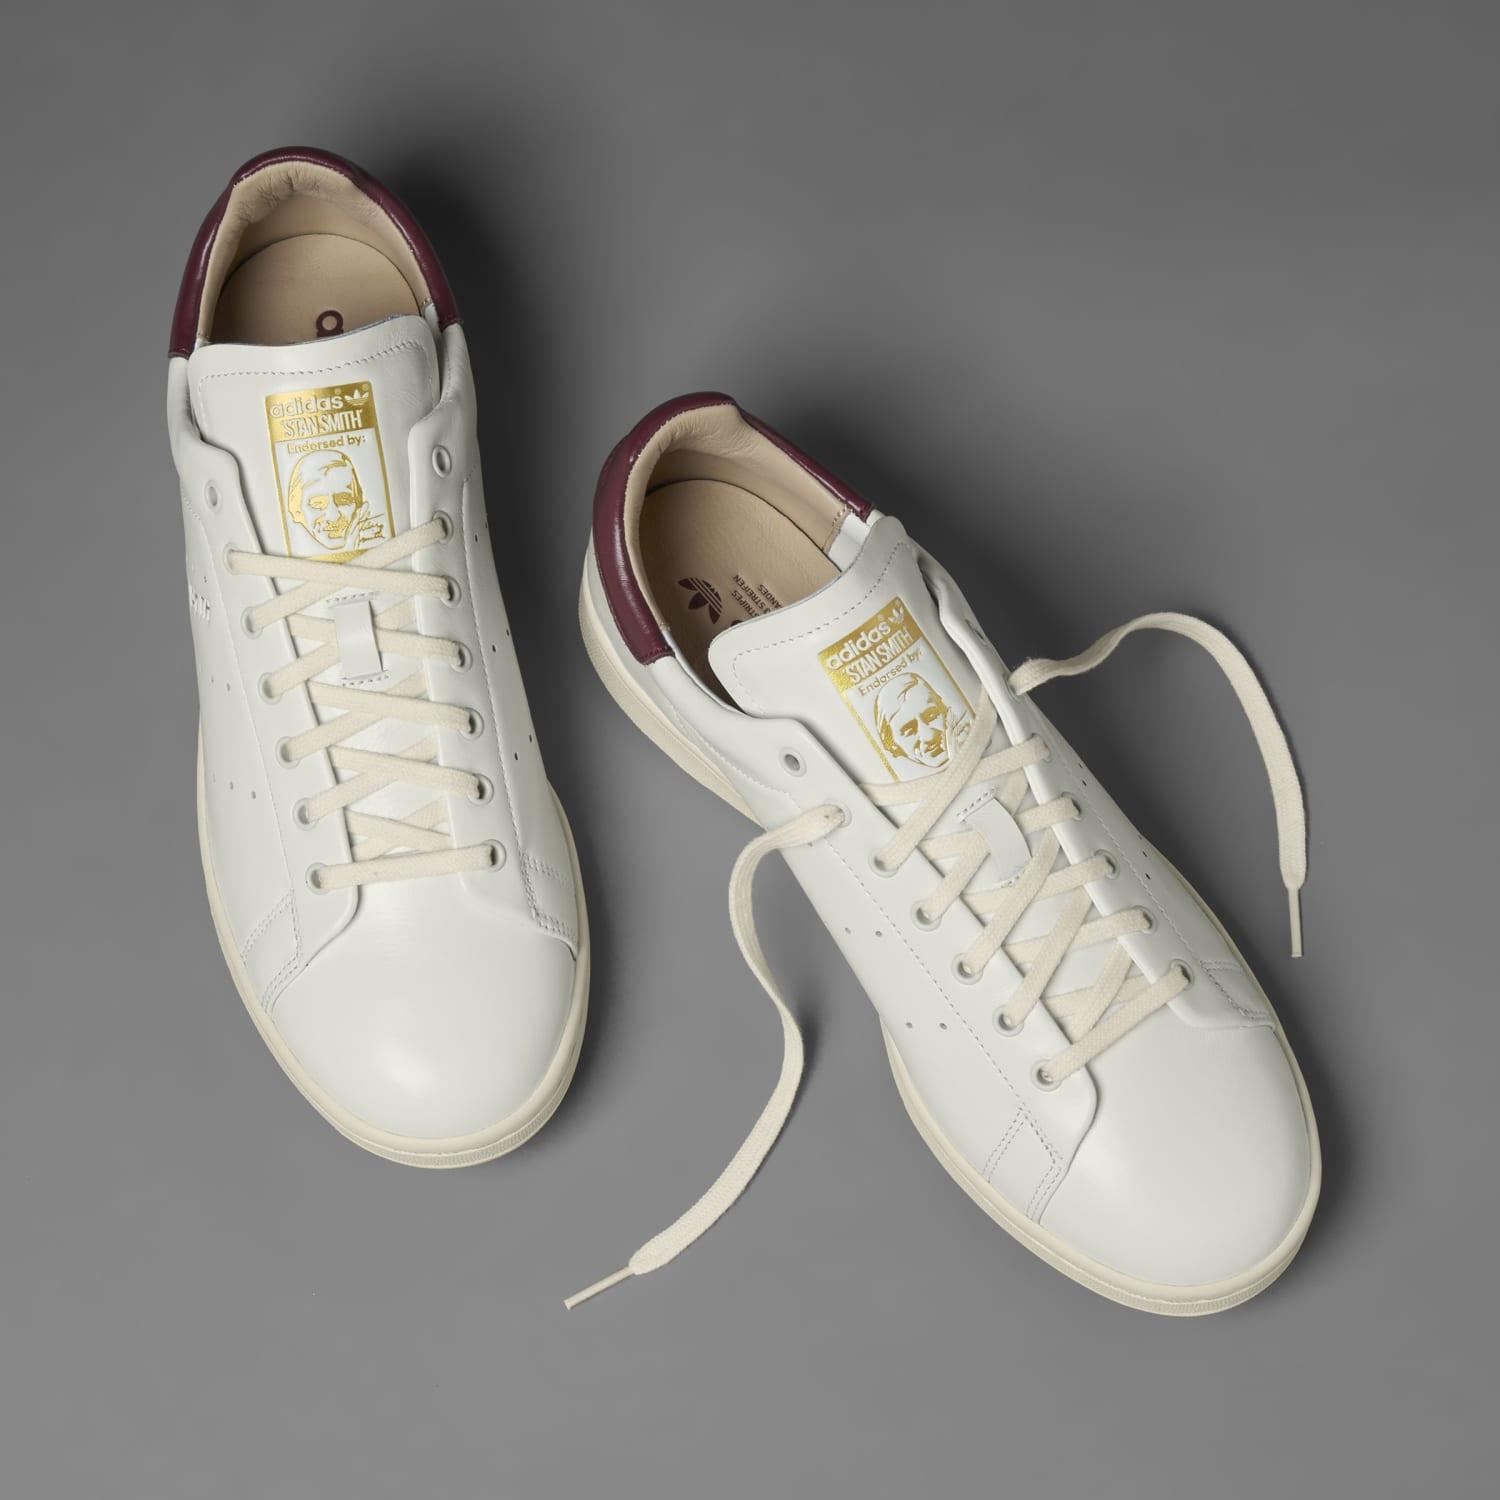 adidas Stan Smith Lux Shoes